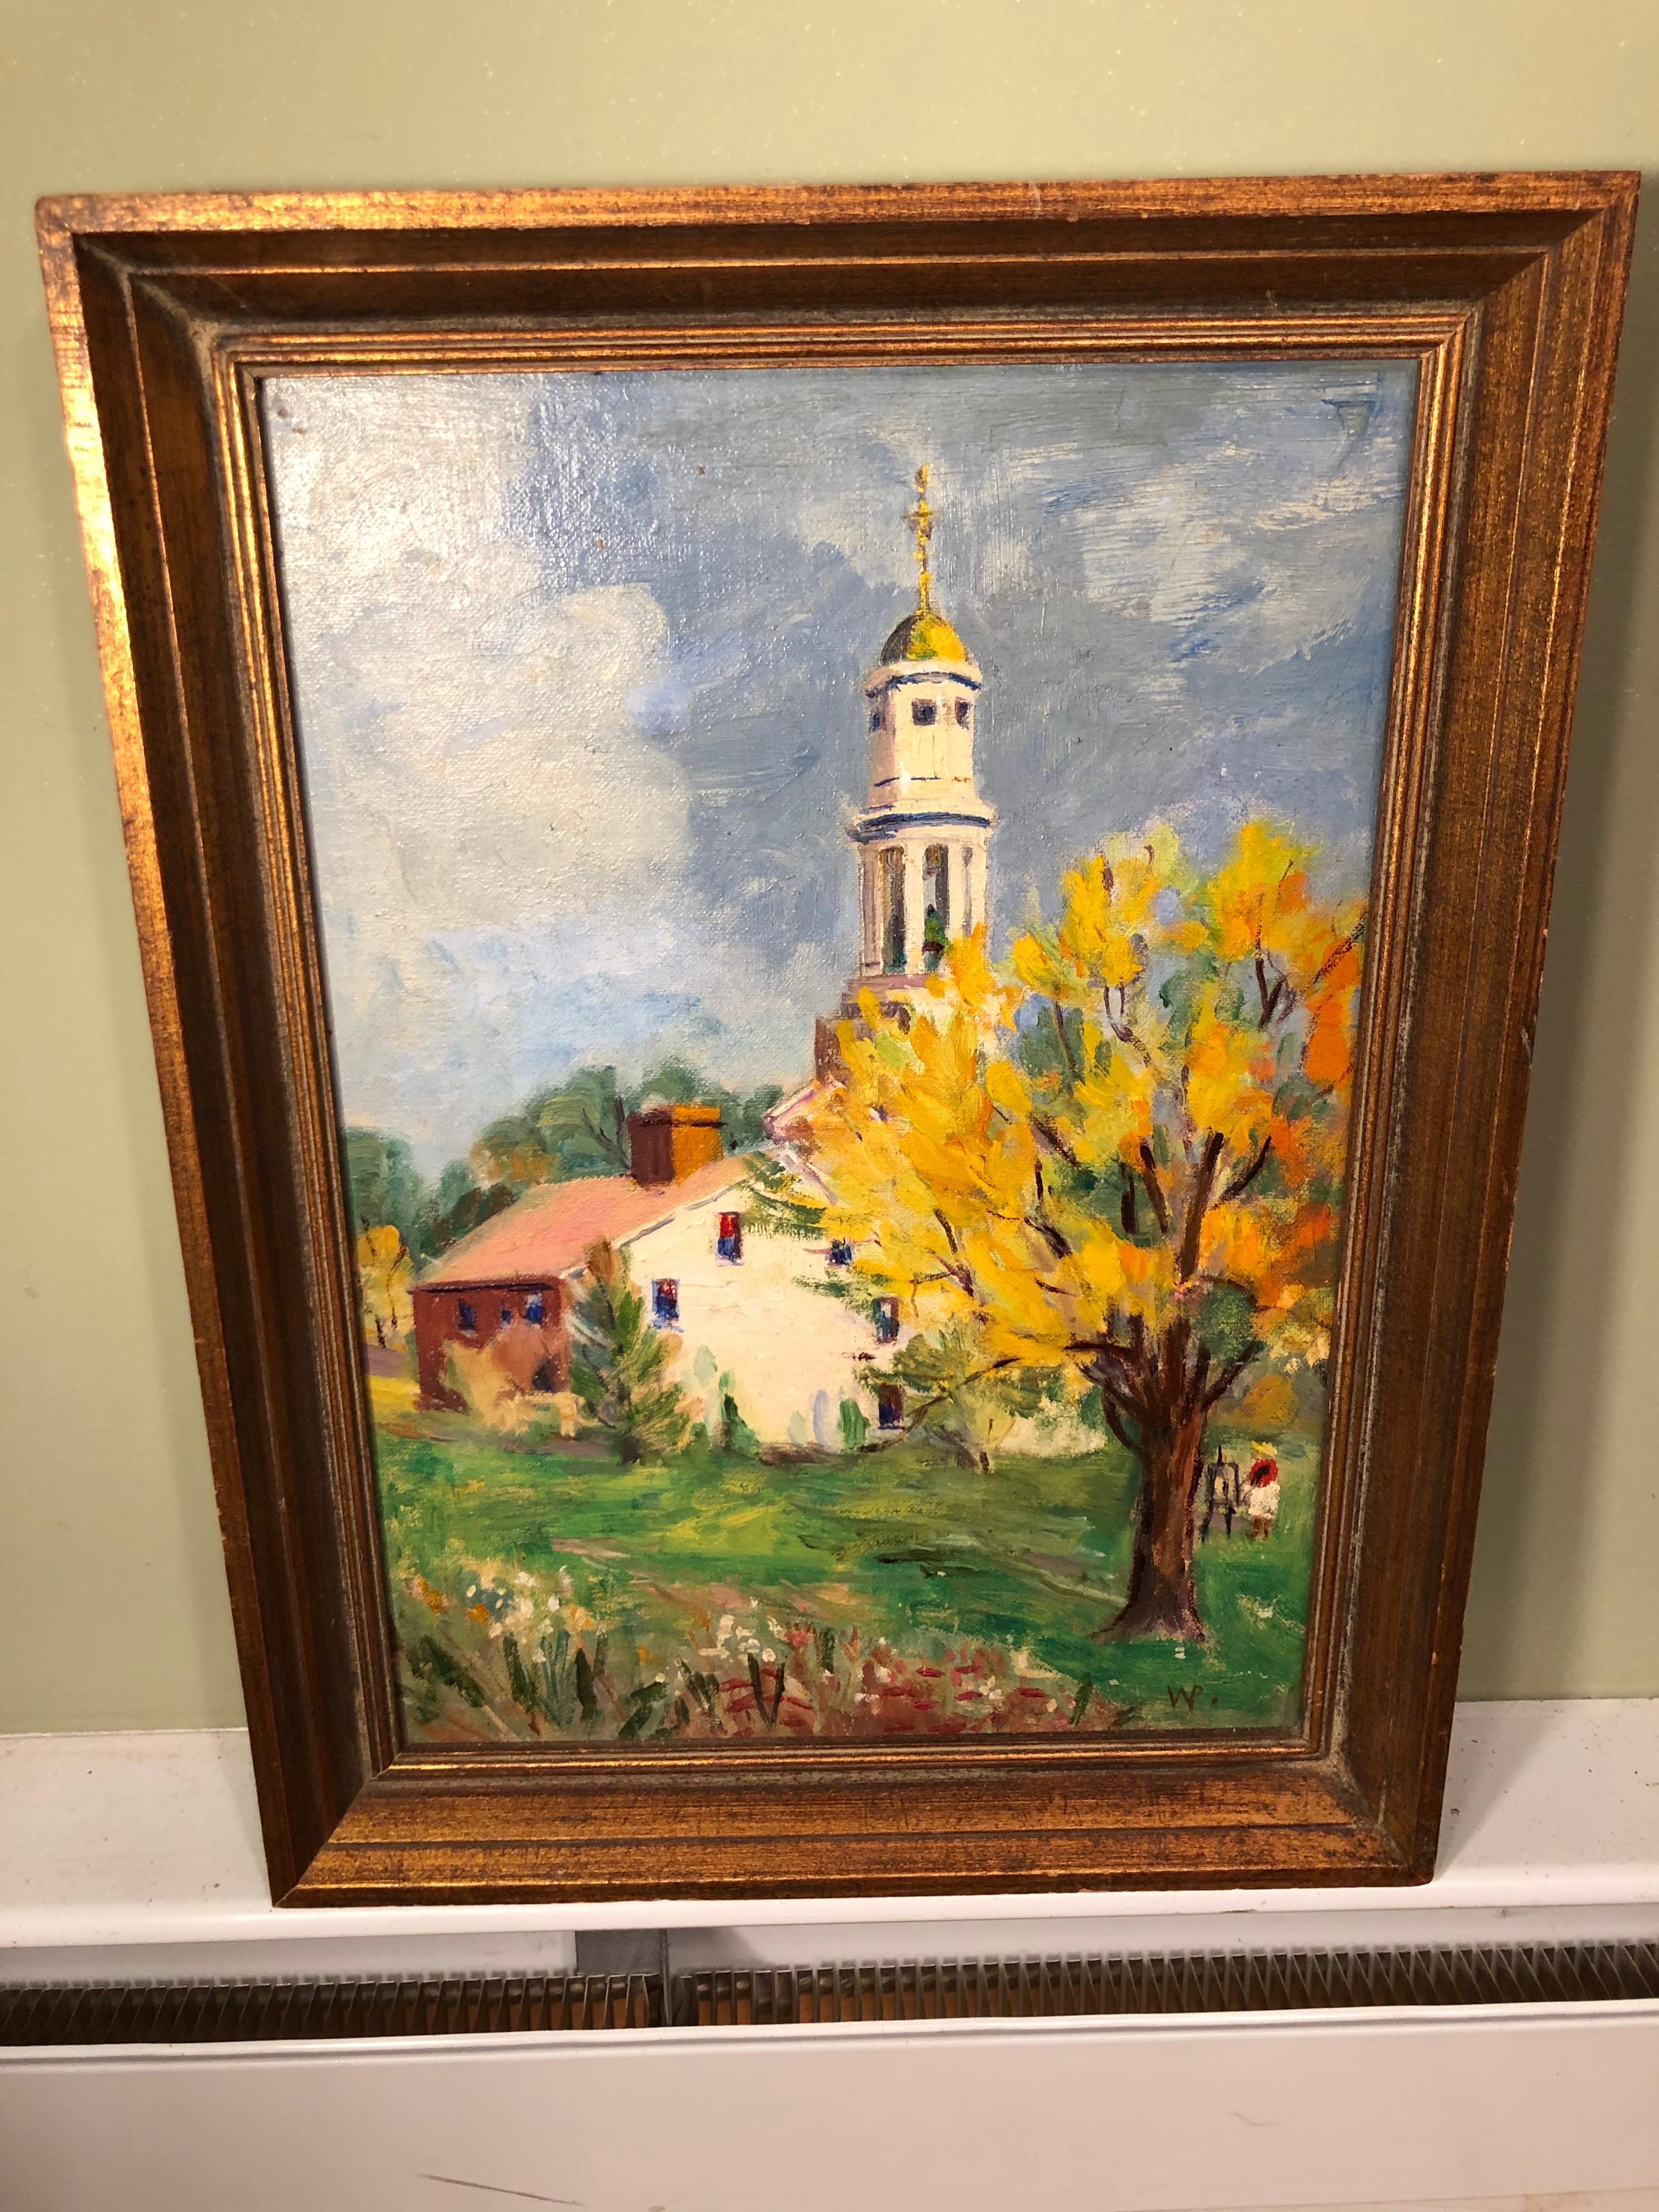 Pastoral oil on board of church. Colorful impasto painting. 
Lovely New England fall composition of a church. The artist has even included themselves in the painting. In a solid wooden frame.

